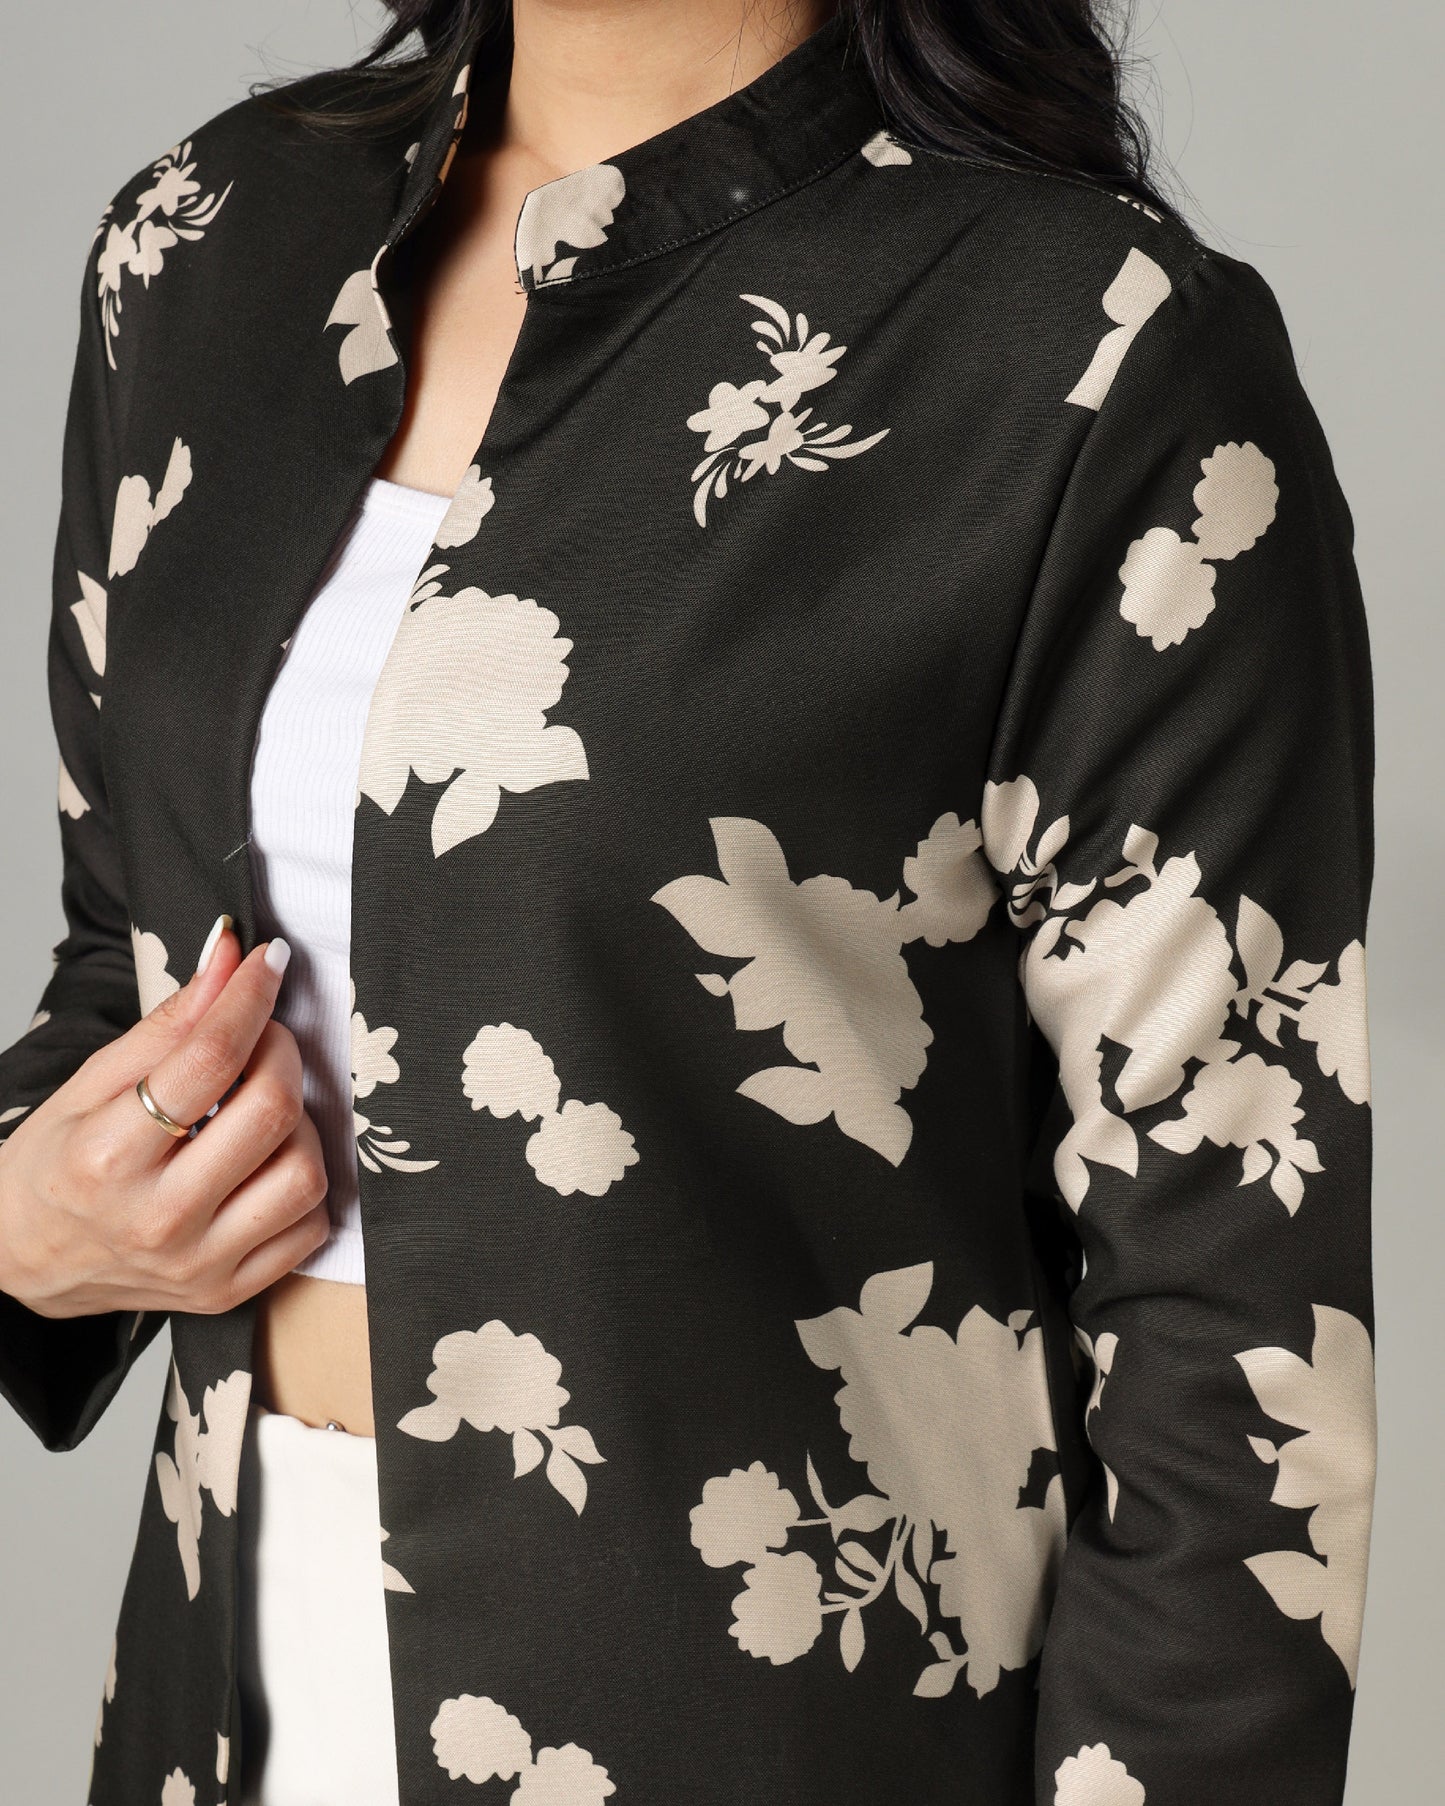 Introducing Black Collection Women's Jacket